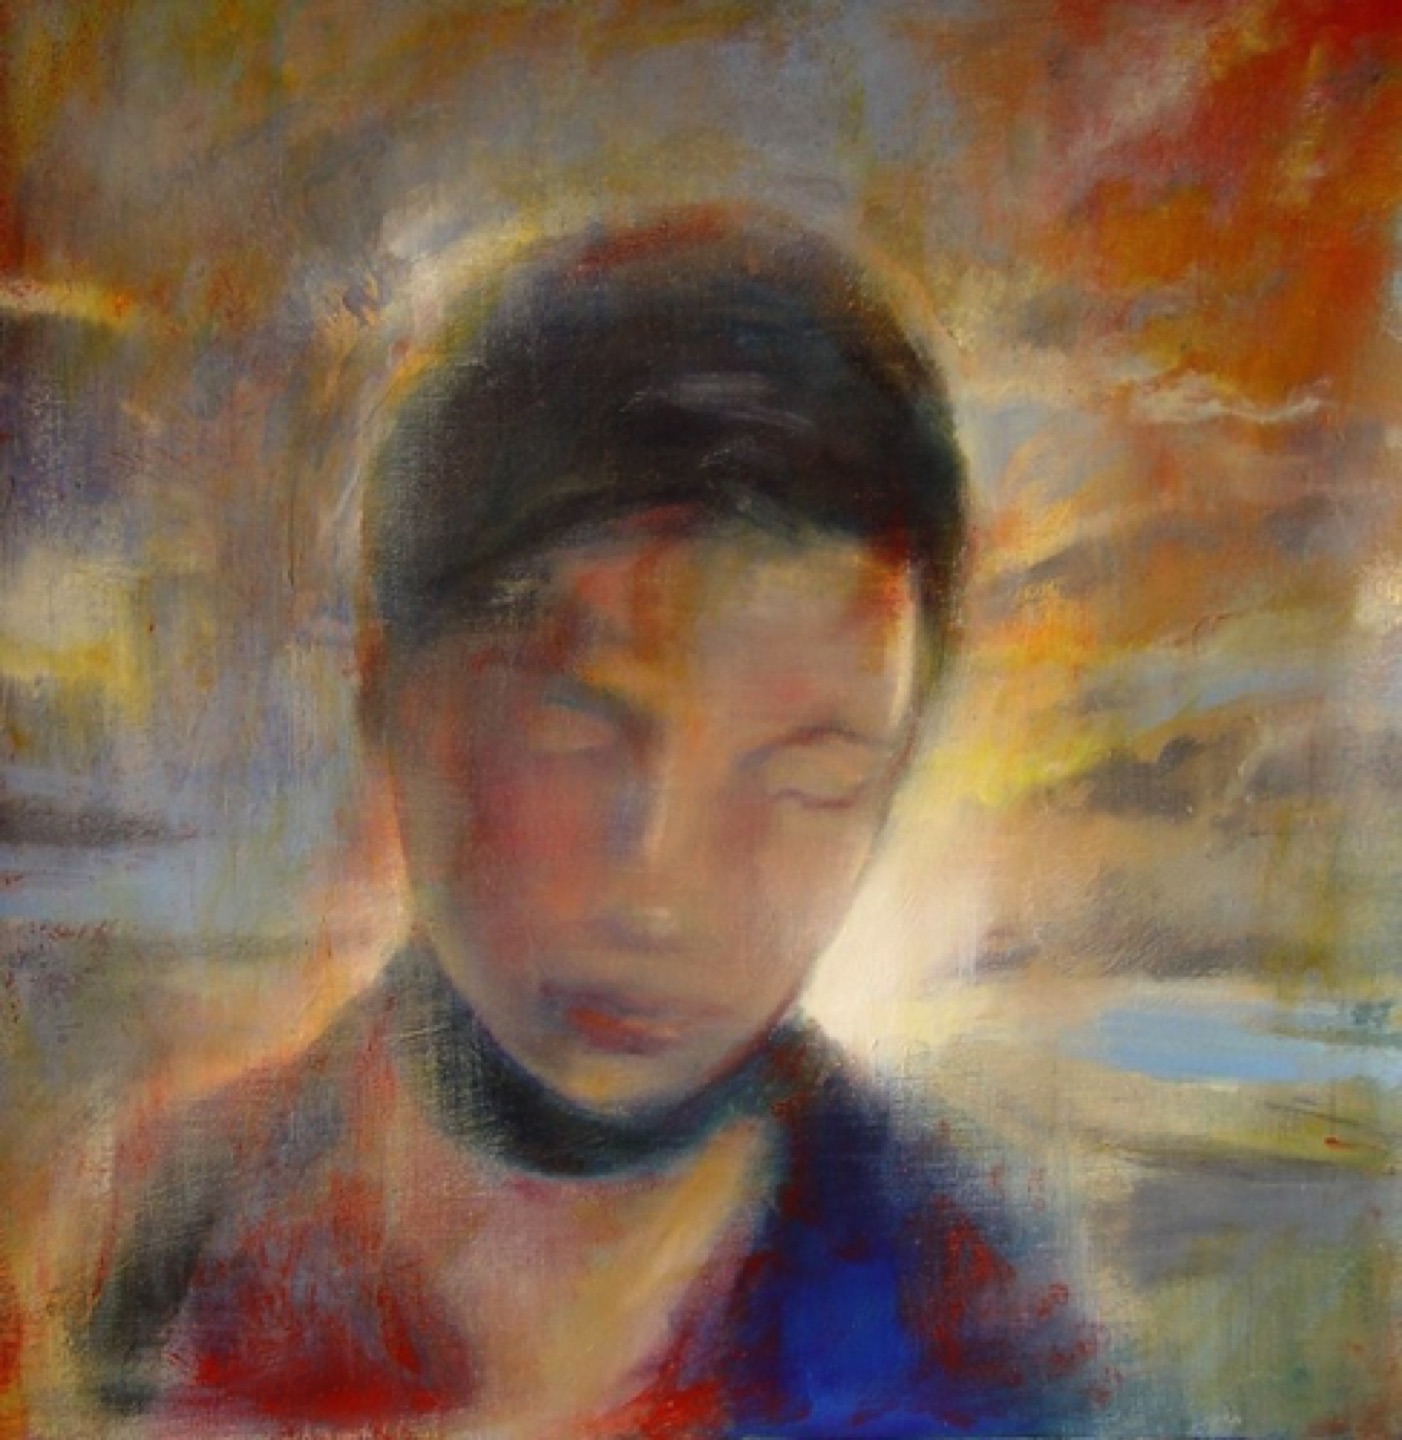 Gregg Chadwick
What the World Whispers
36"x36" oil on linen 2003 
Private Collection, Los Angeles, California